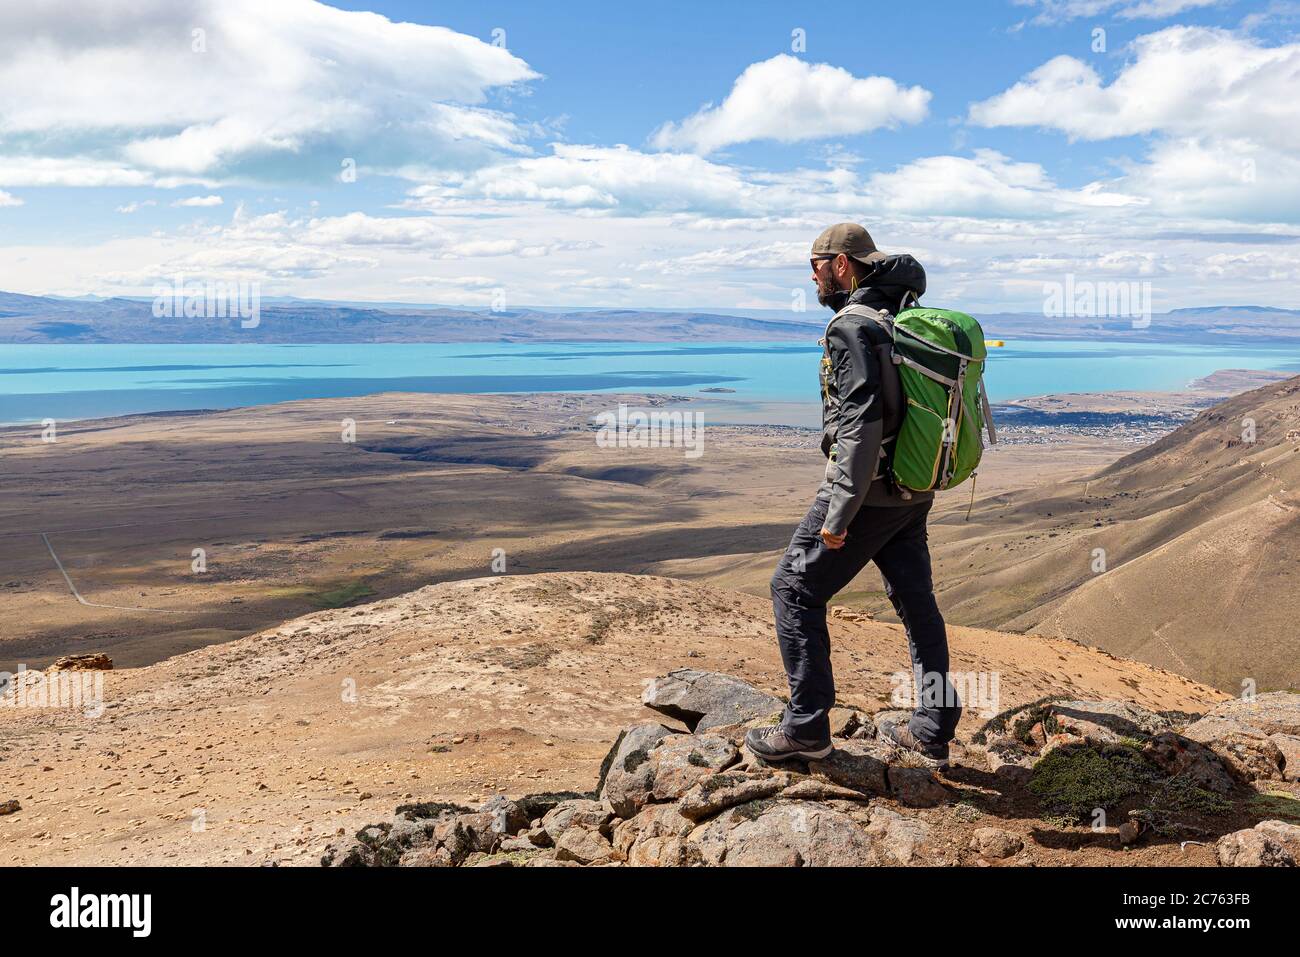 View of Argentinean lake, from the top of mount 'Cerro Moyano' Stock Photo